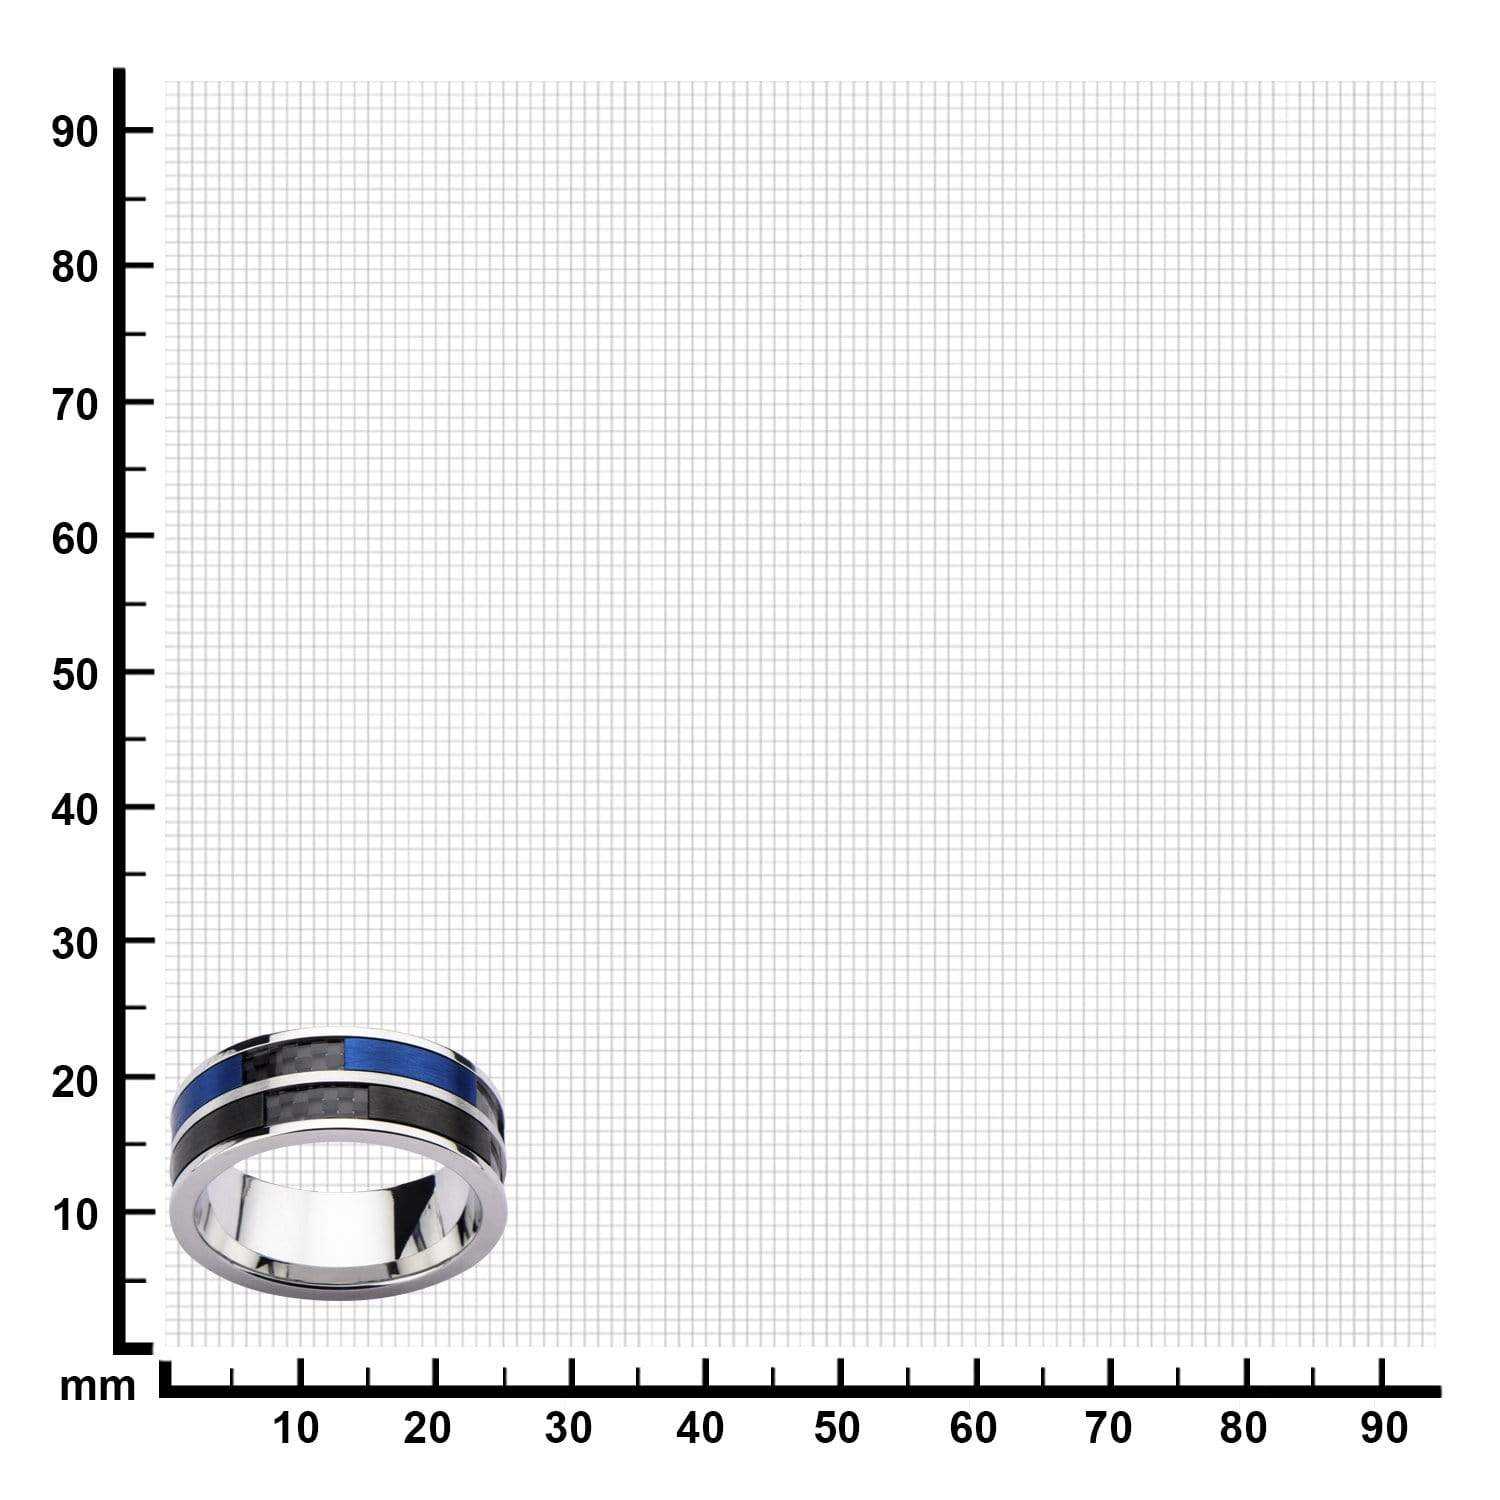 INOX JEWELRY Rings Blue, Black and Silver Tone Stainless Steel Carbon Fiber Double Band Ring